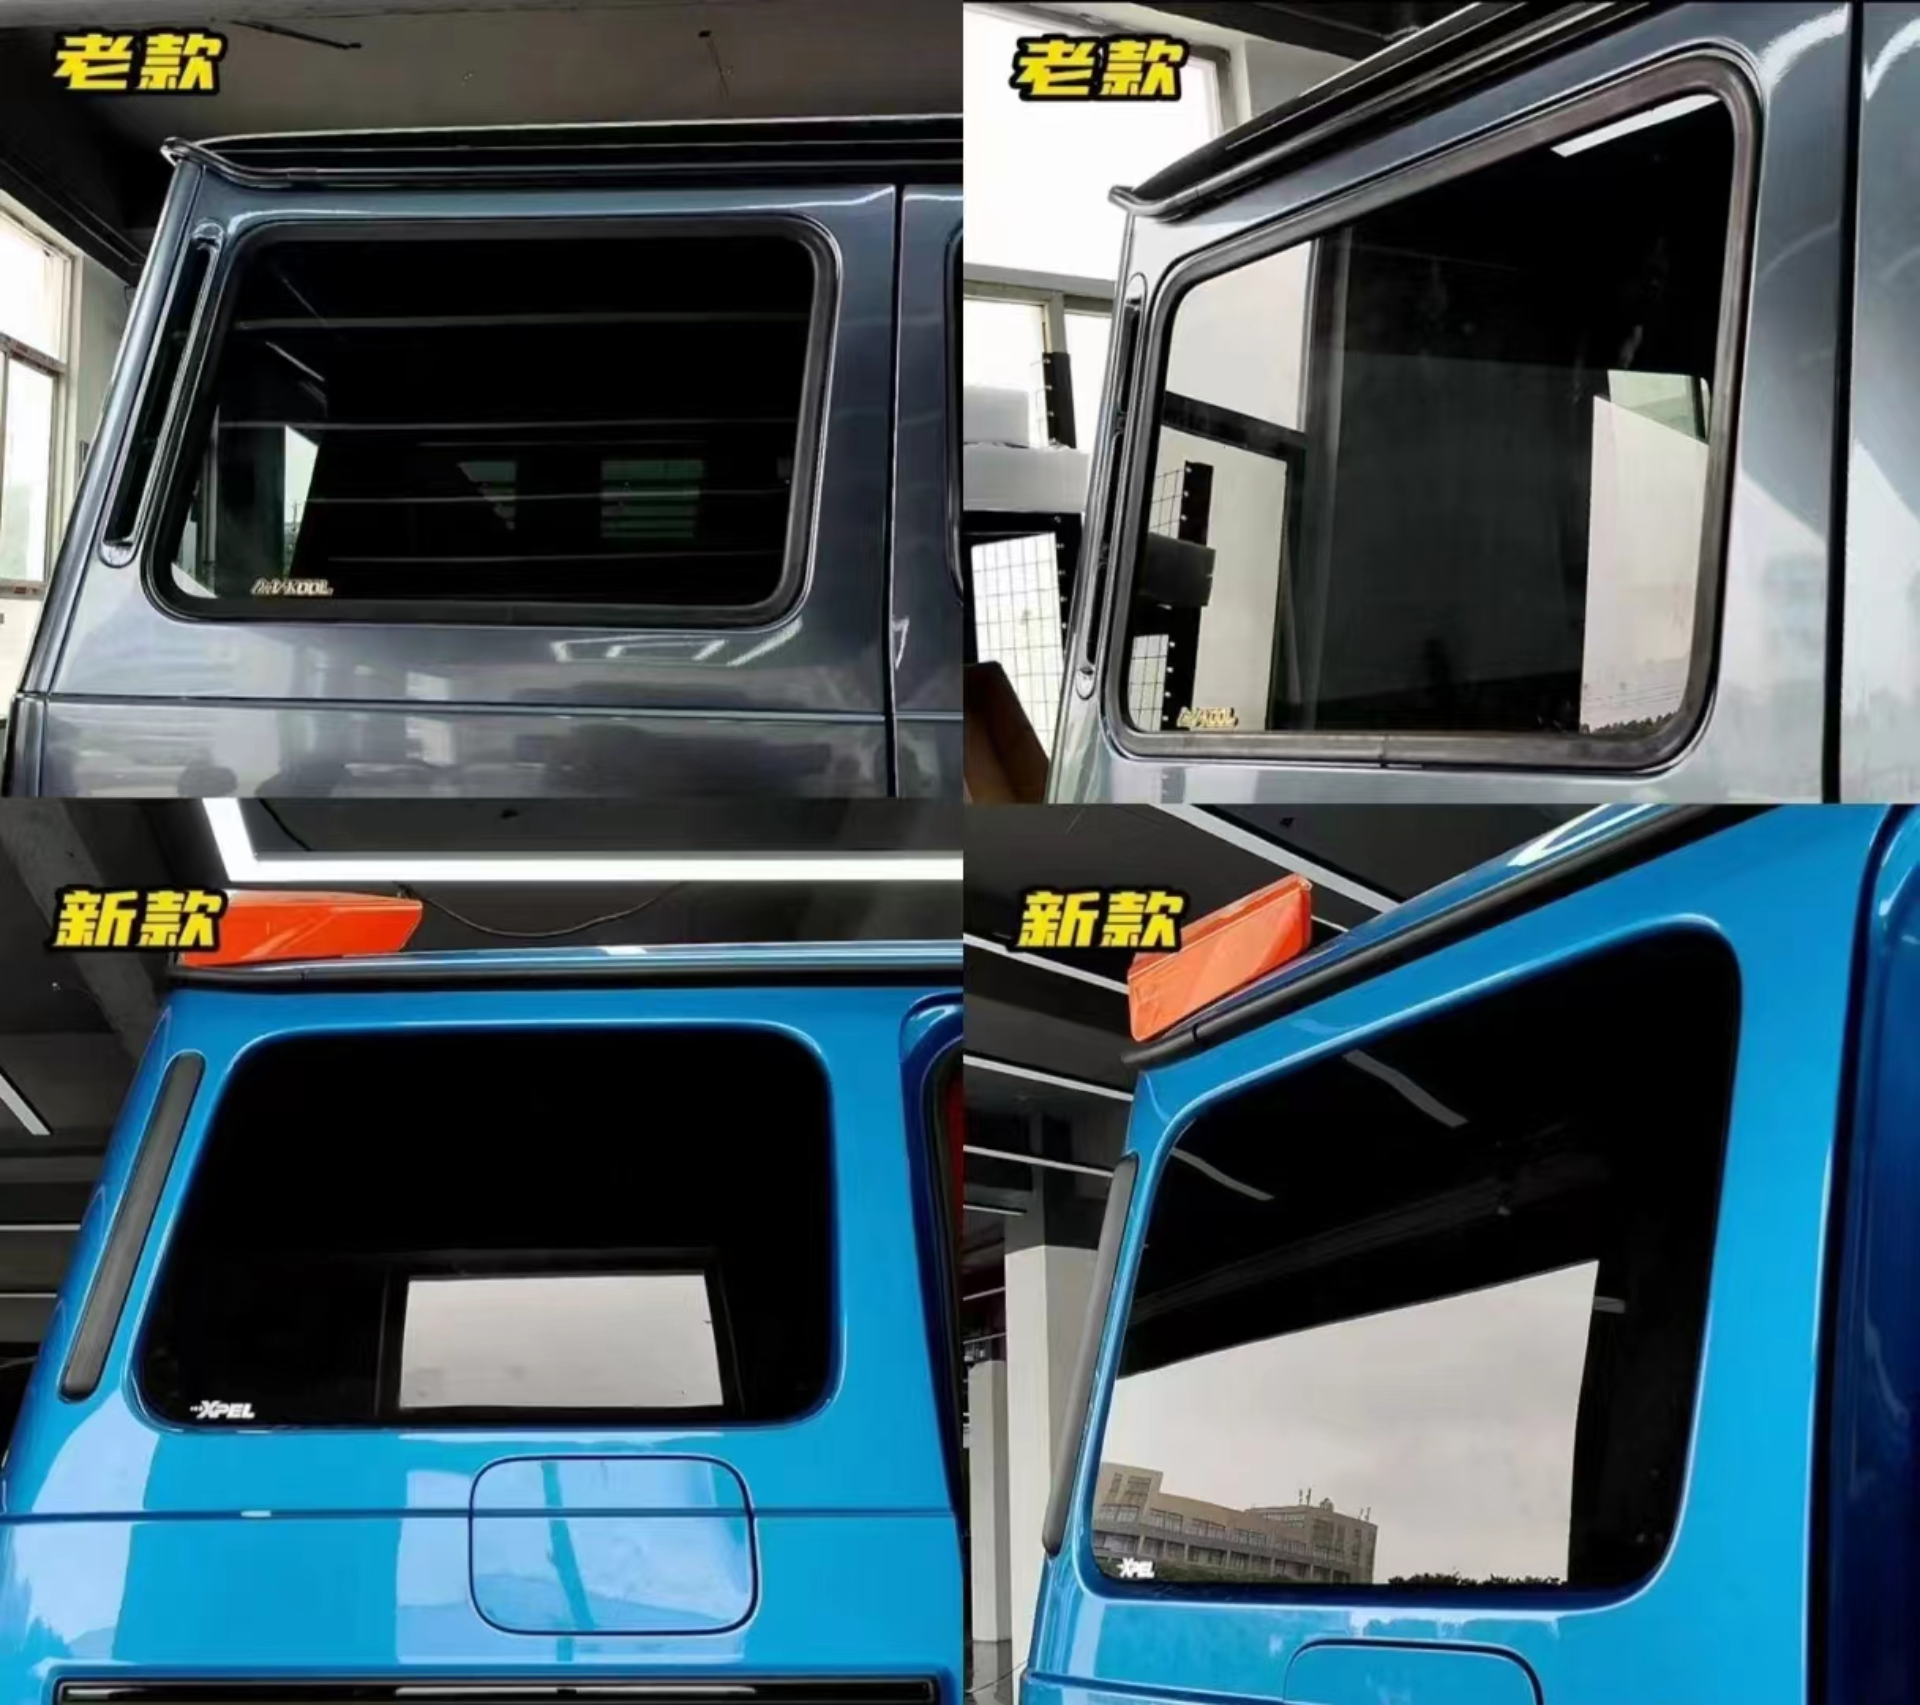 09-18 Benz G Class refit frameless glass front and rear doors on both sides